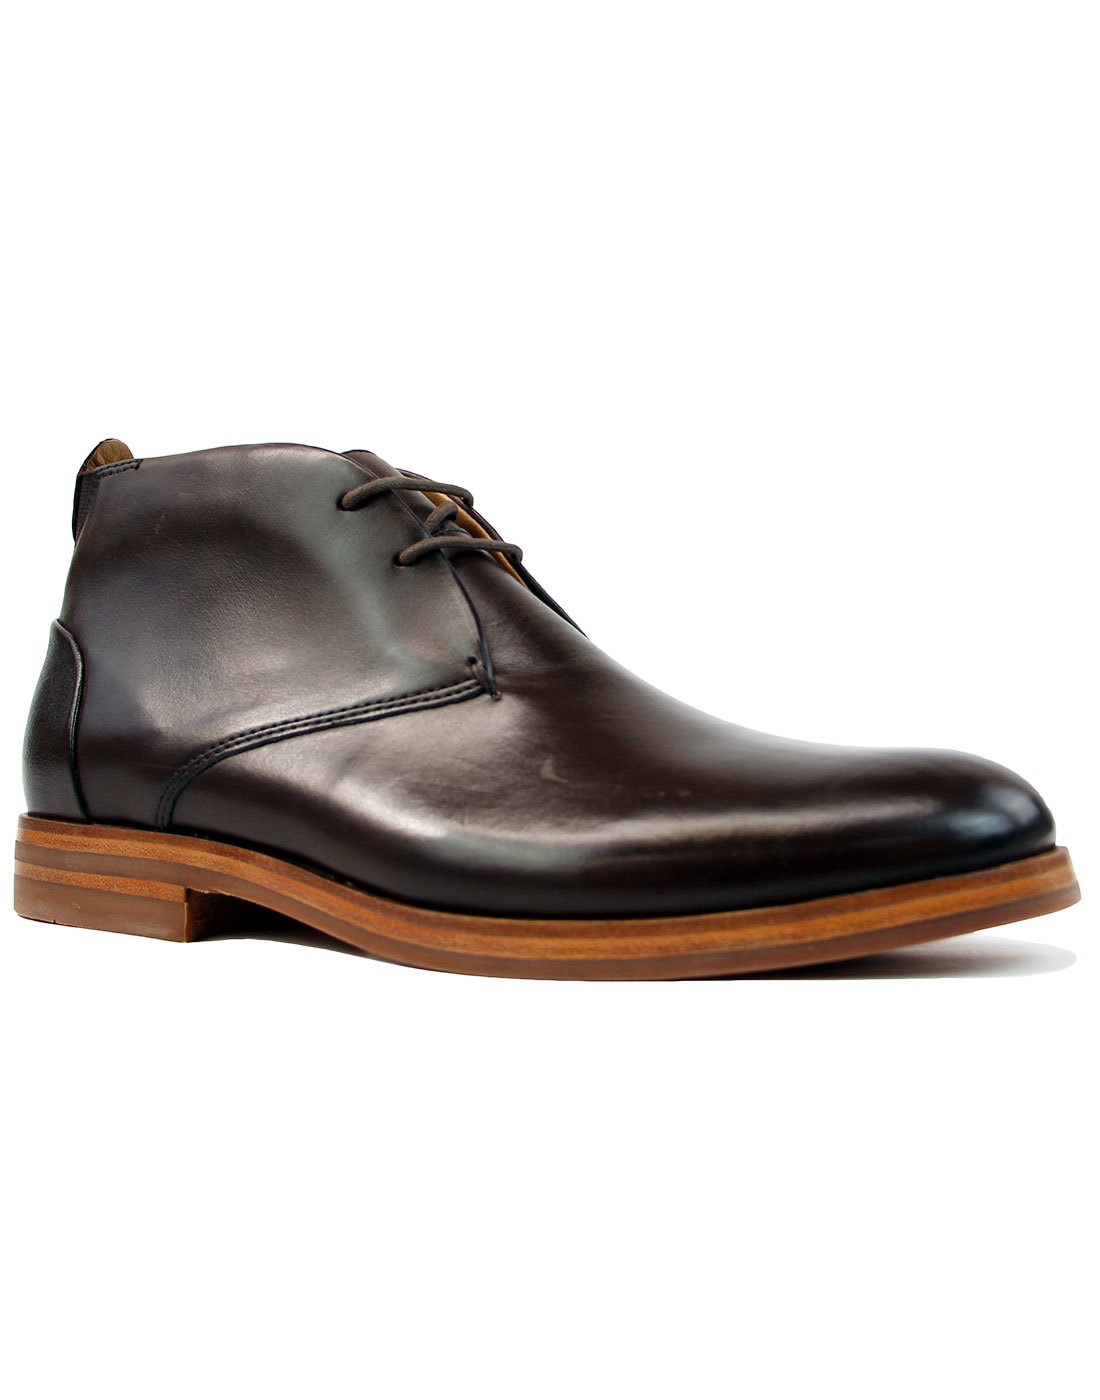 H by Hudson Matteo 60s Mod Chukka Boots in Brown